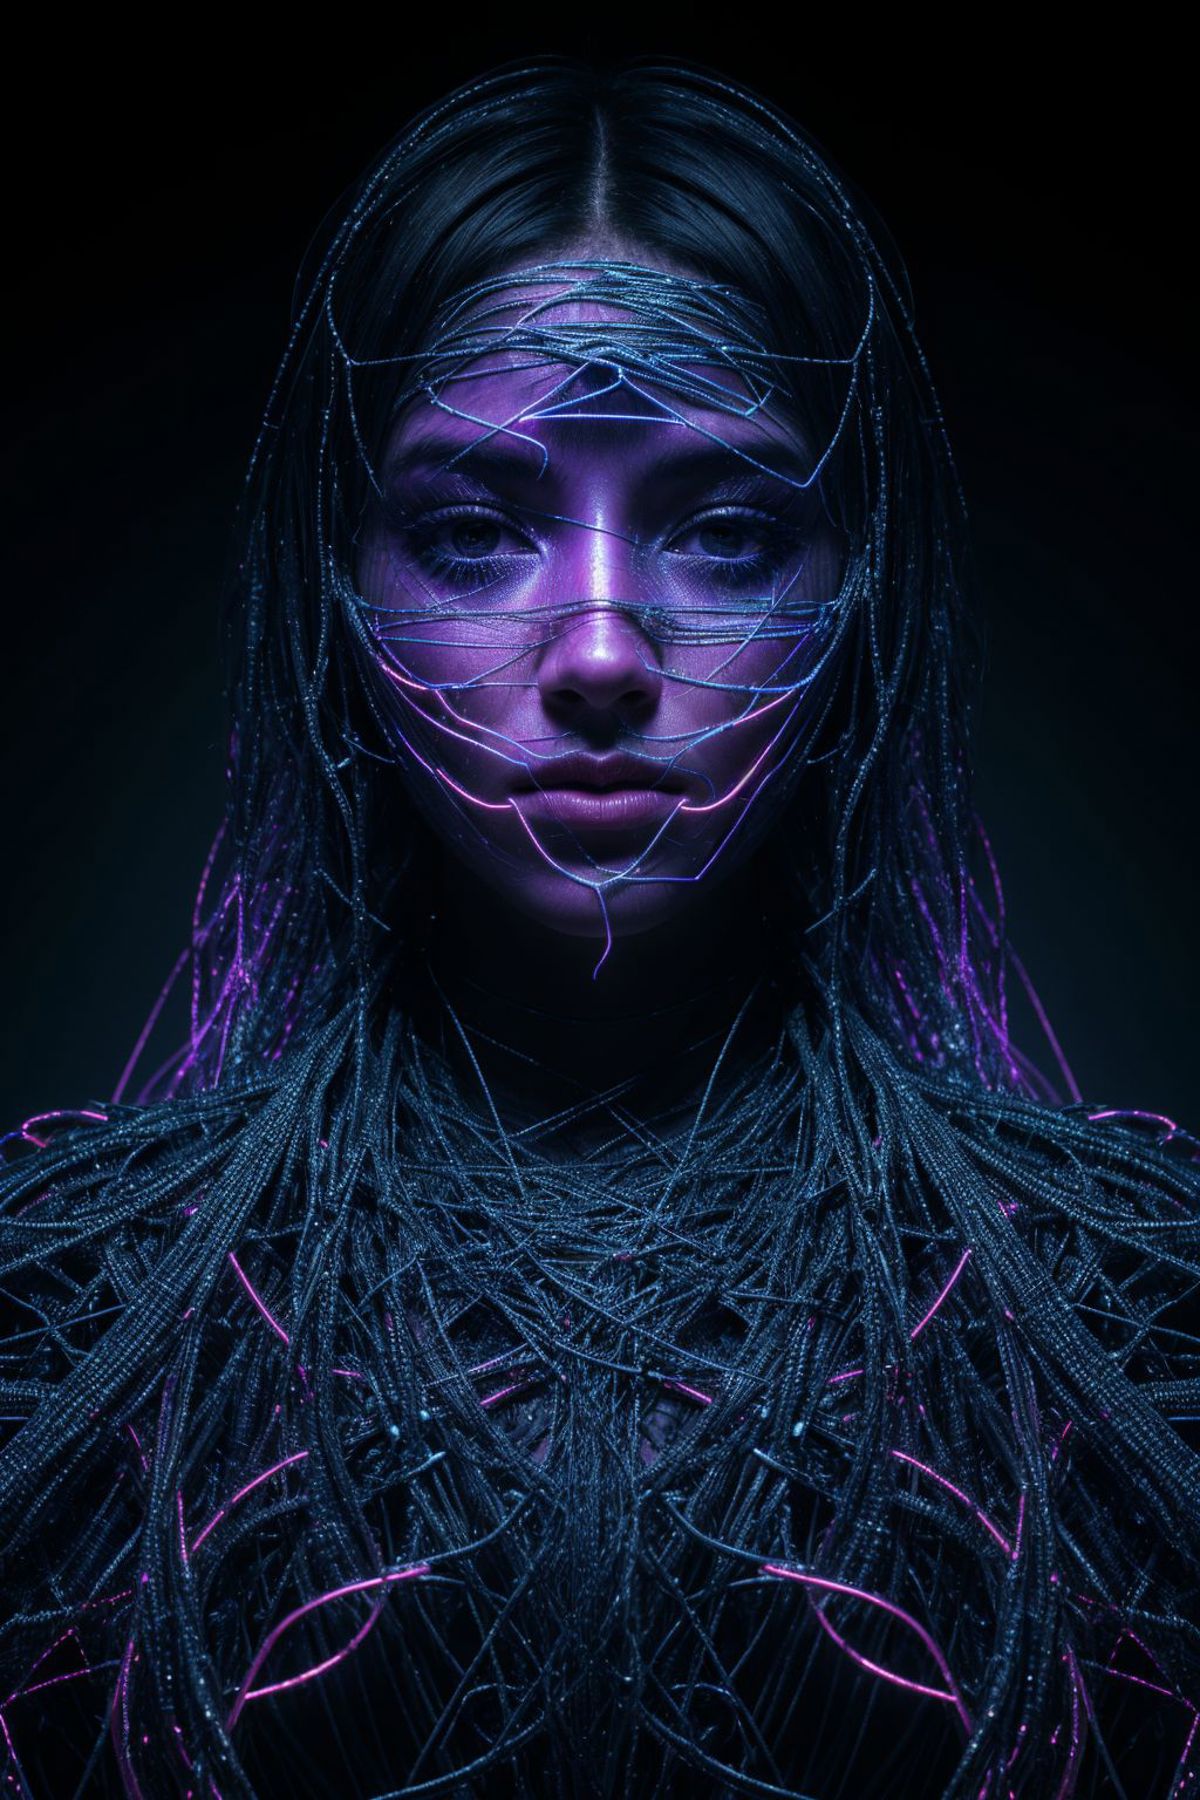 A detailed purple and black image of a woman with a wired face mask.